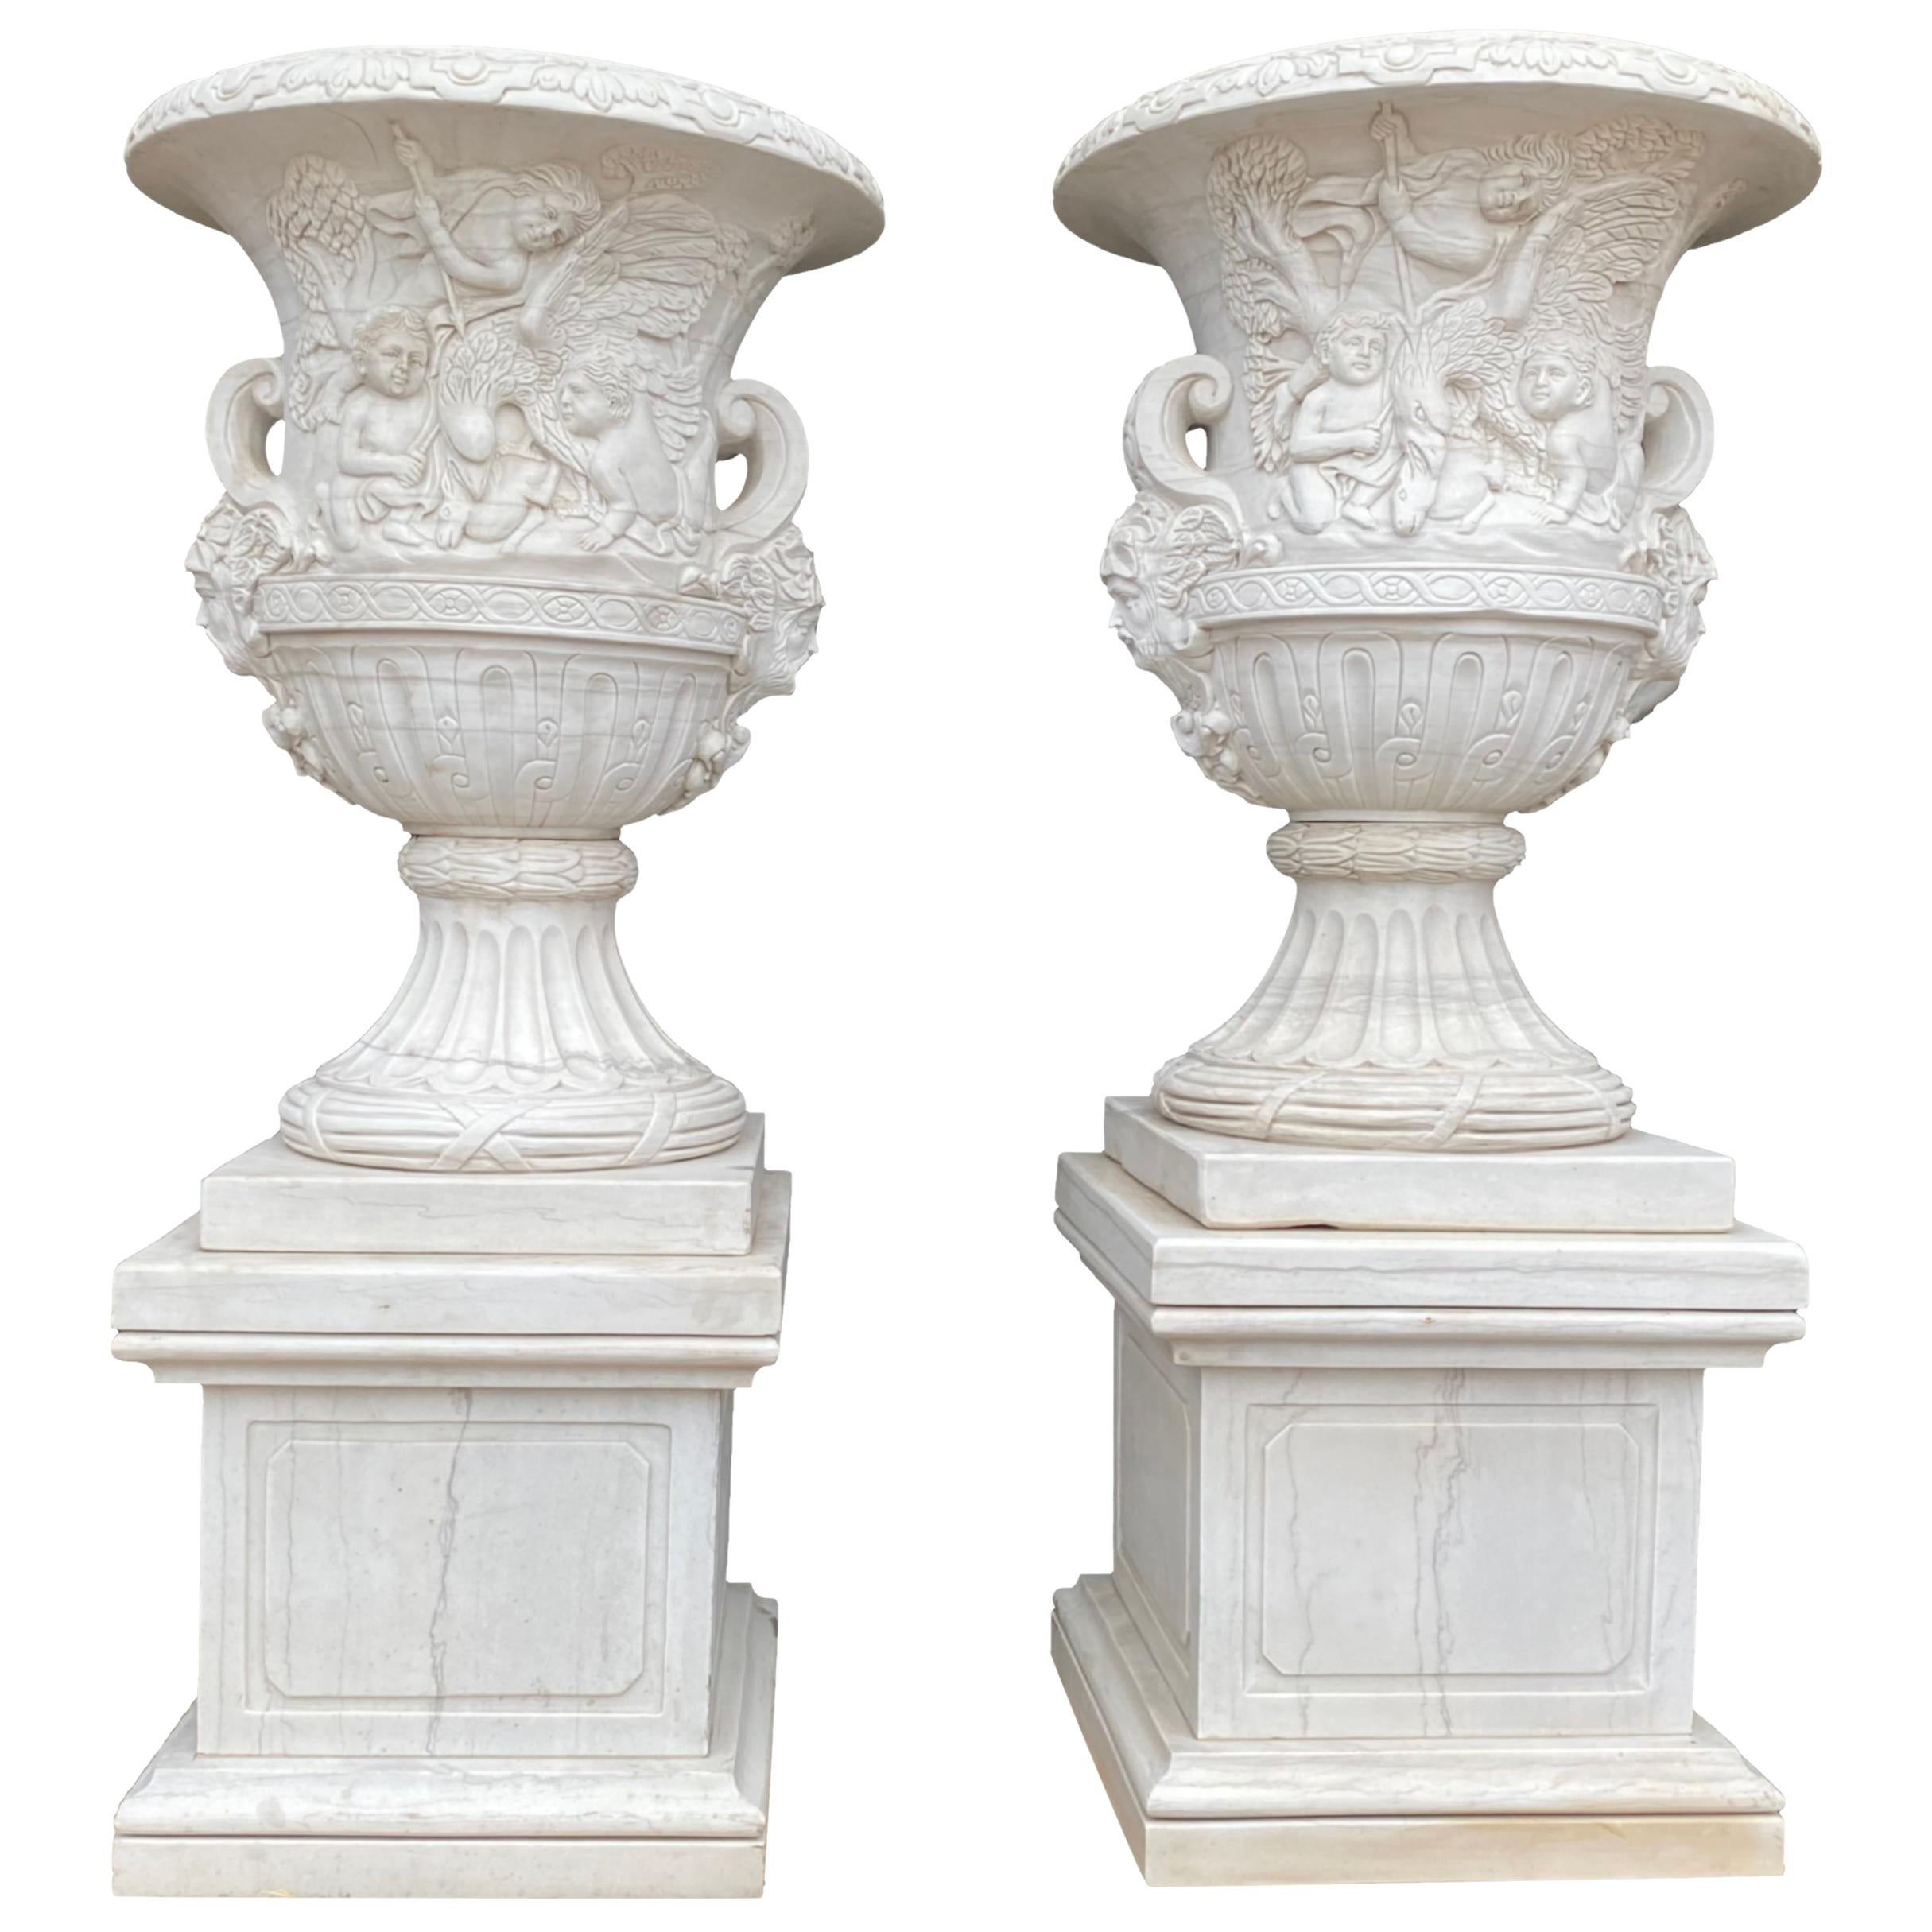 Pair of White Carrara Marble Campana-form Urns, 21st Century For Sale